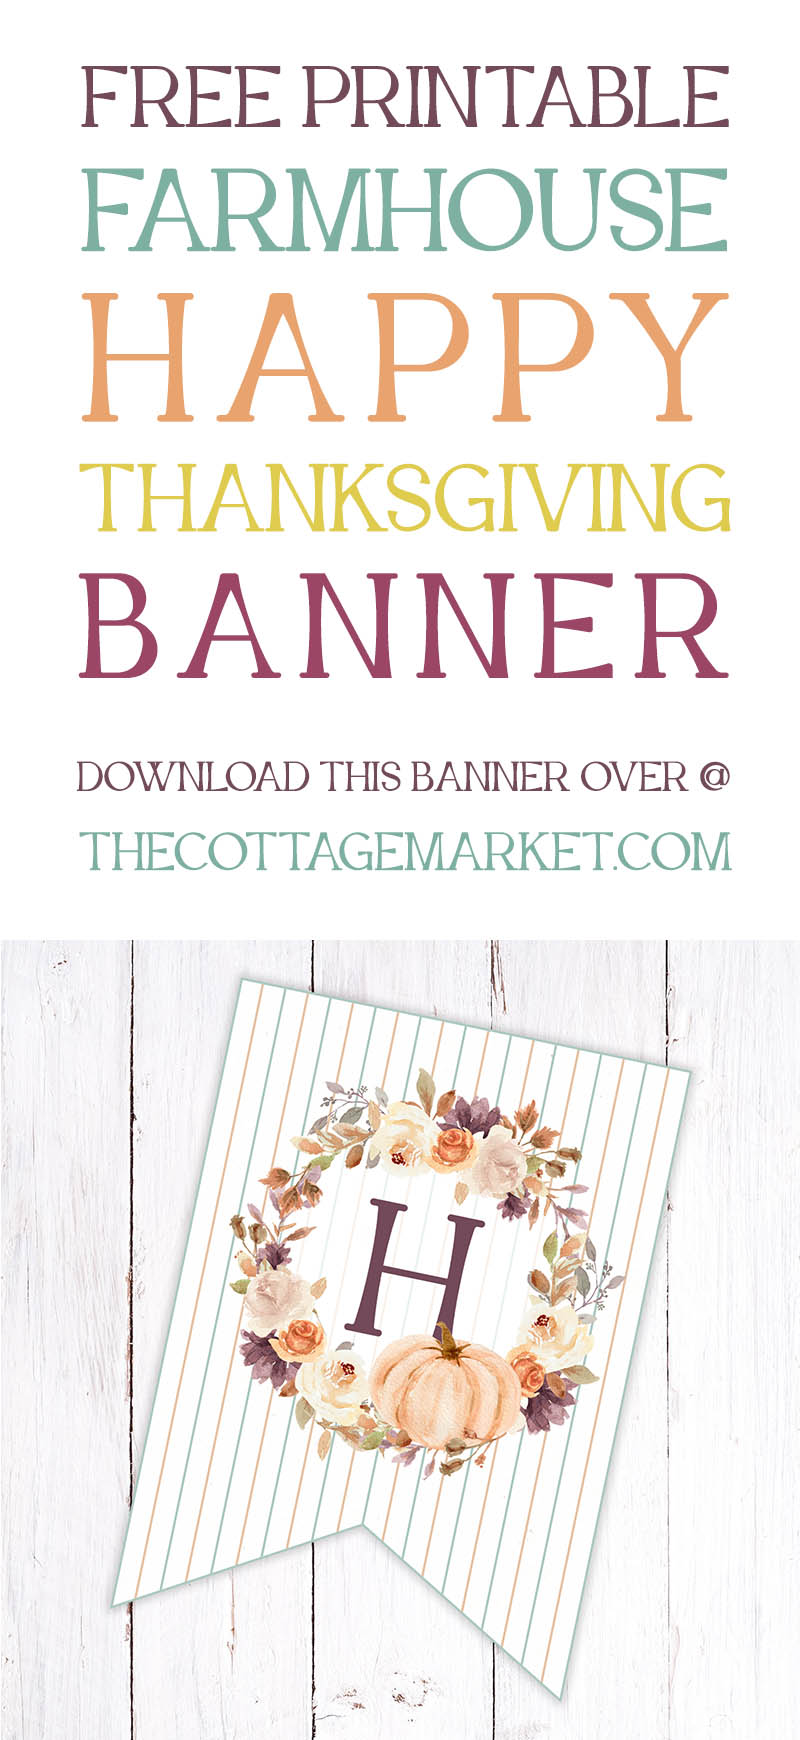 If you are looking for a little something special to add charm to your home this Thanksgiving Season, Why not make this beautiful Free Printable Farmhouse Happy Thanksgiving Banner!